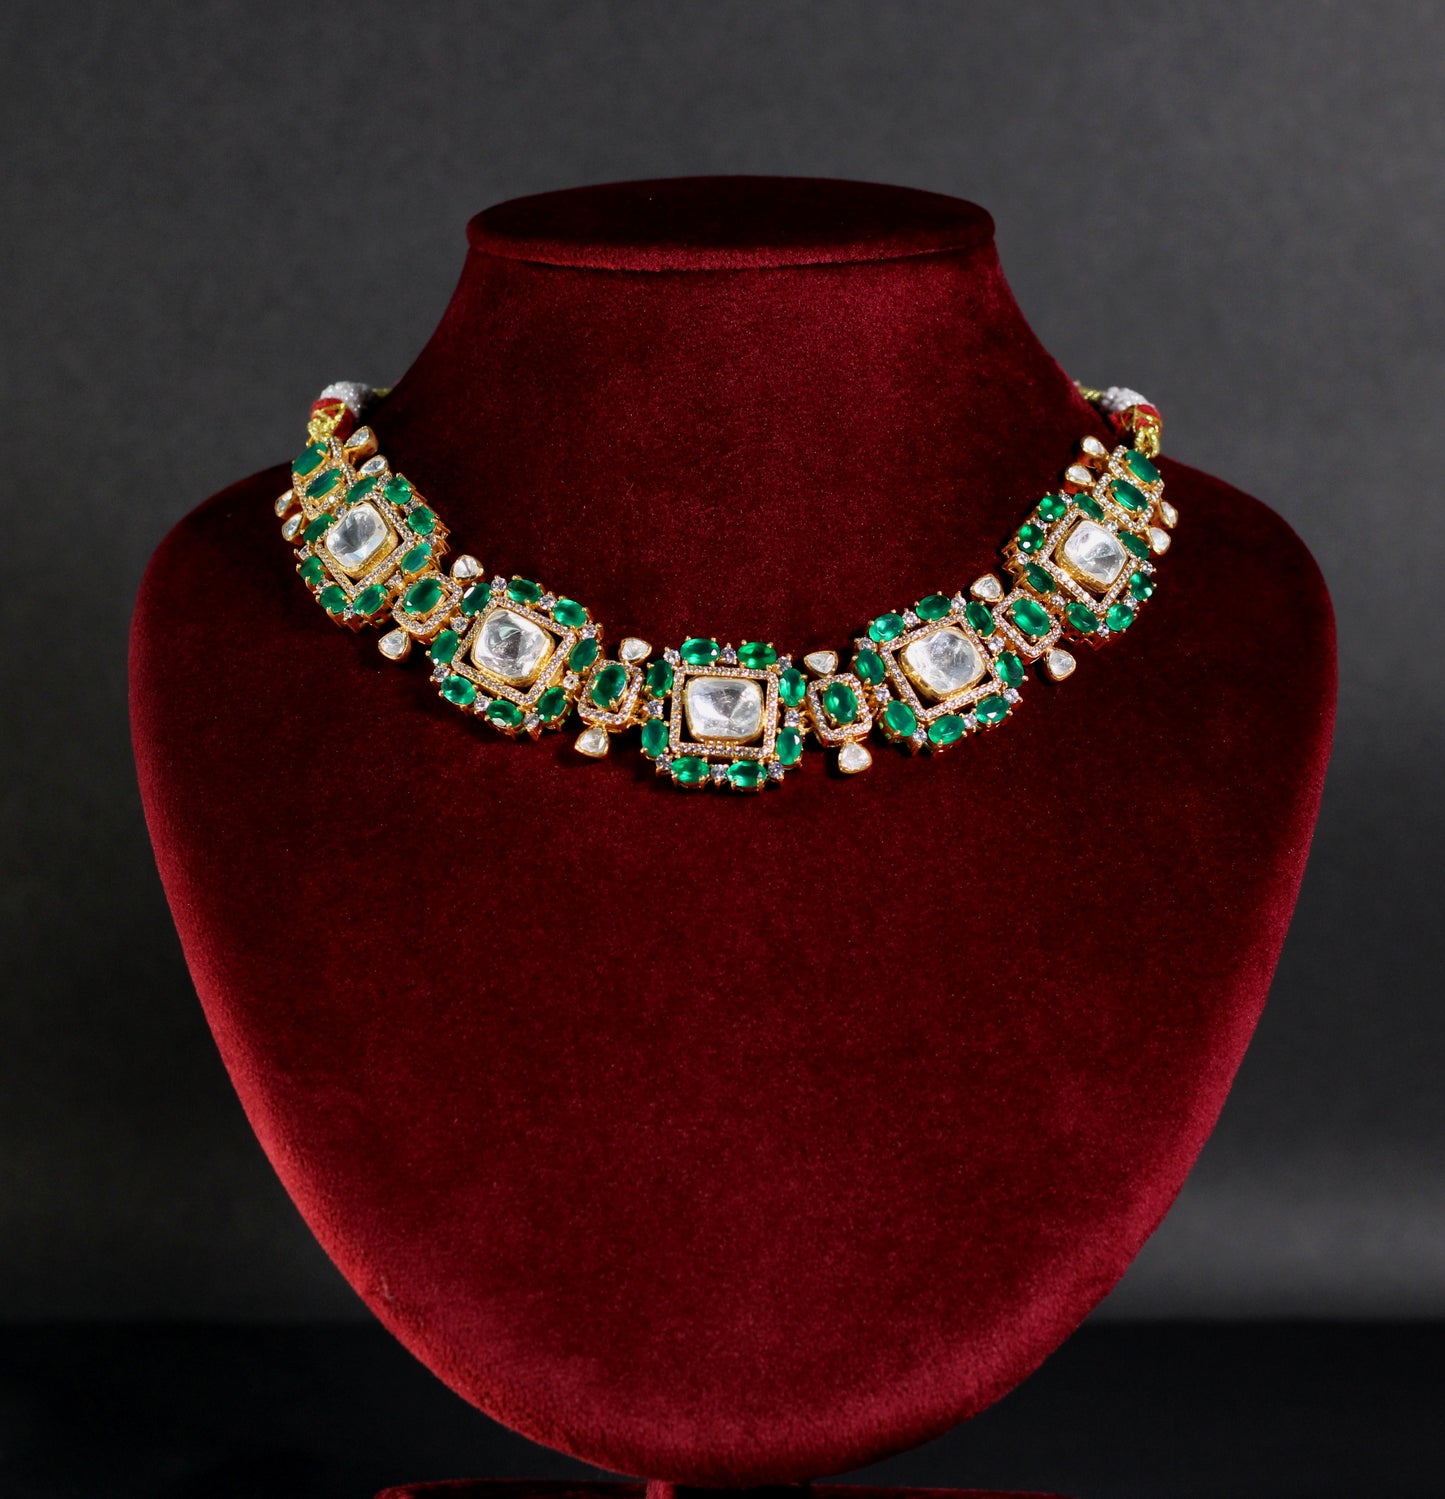 NECKLACE AND EARRING IN 92.5 STERLING SILVER IN 18KT GOLD PLATED WITH MOSONITE POLKI AND GREEN ONYX WITH ZIRCONIA